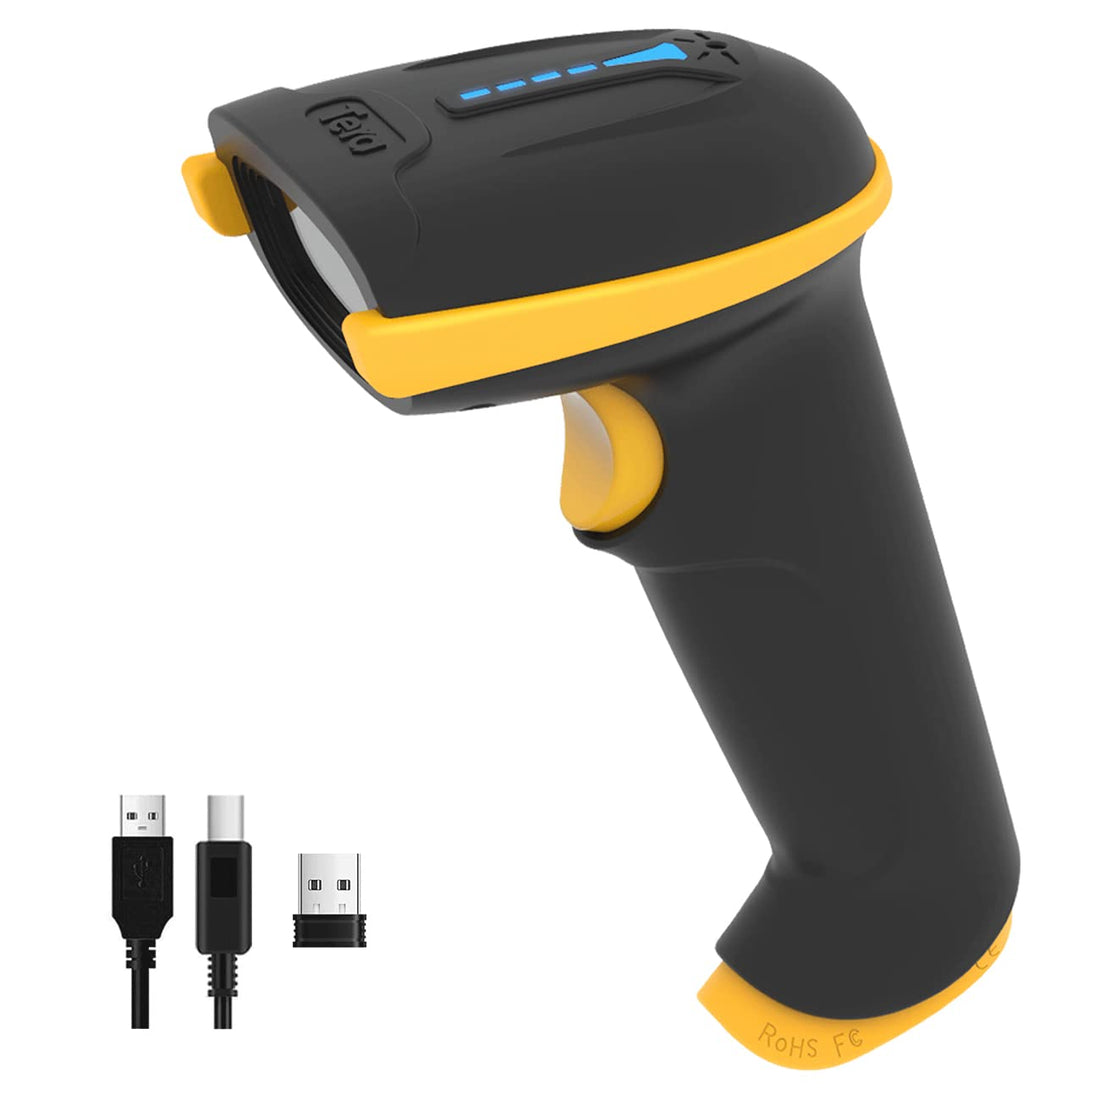 Tera Barcode Scanner Wireless Versatile 2-in-1 (2.4Ghz Wireless+USB 2.0 Wired) with Battery Level Indicator, 328 Feet Transmission Distance Rechargeable 1D Laser Bar Code Reader Handheld 5100E Yellow